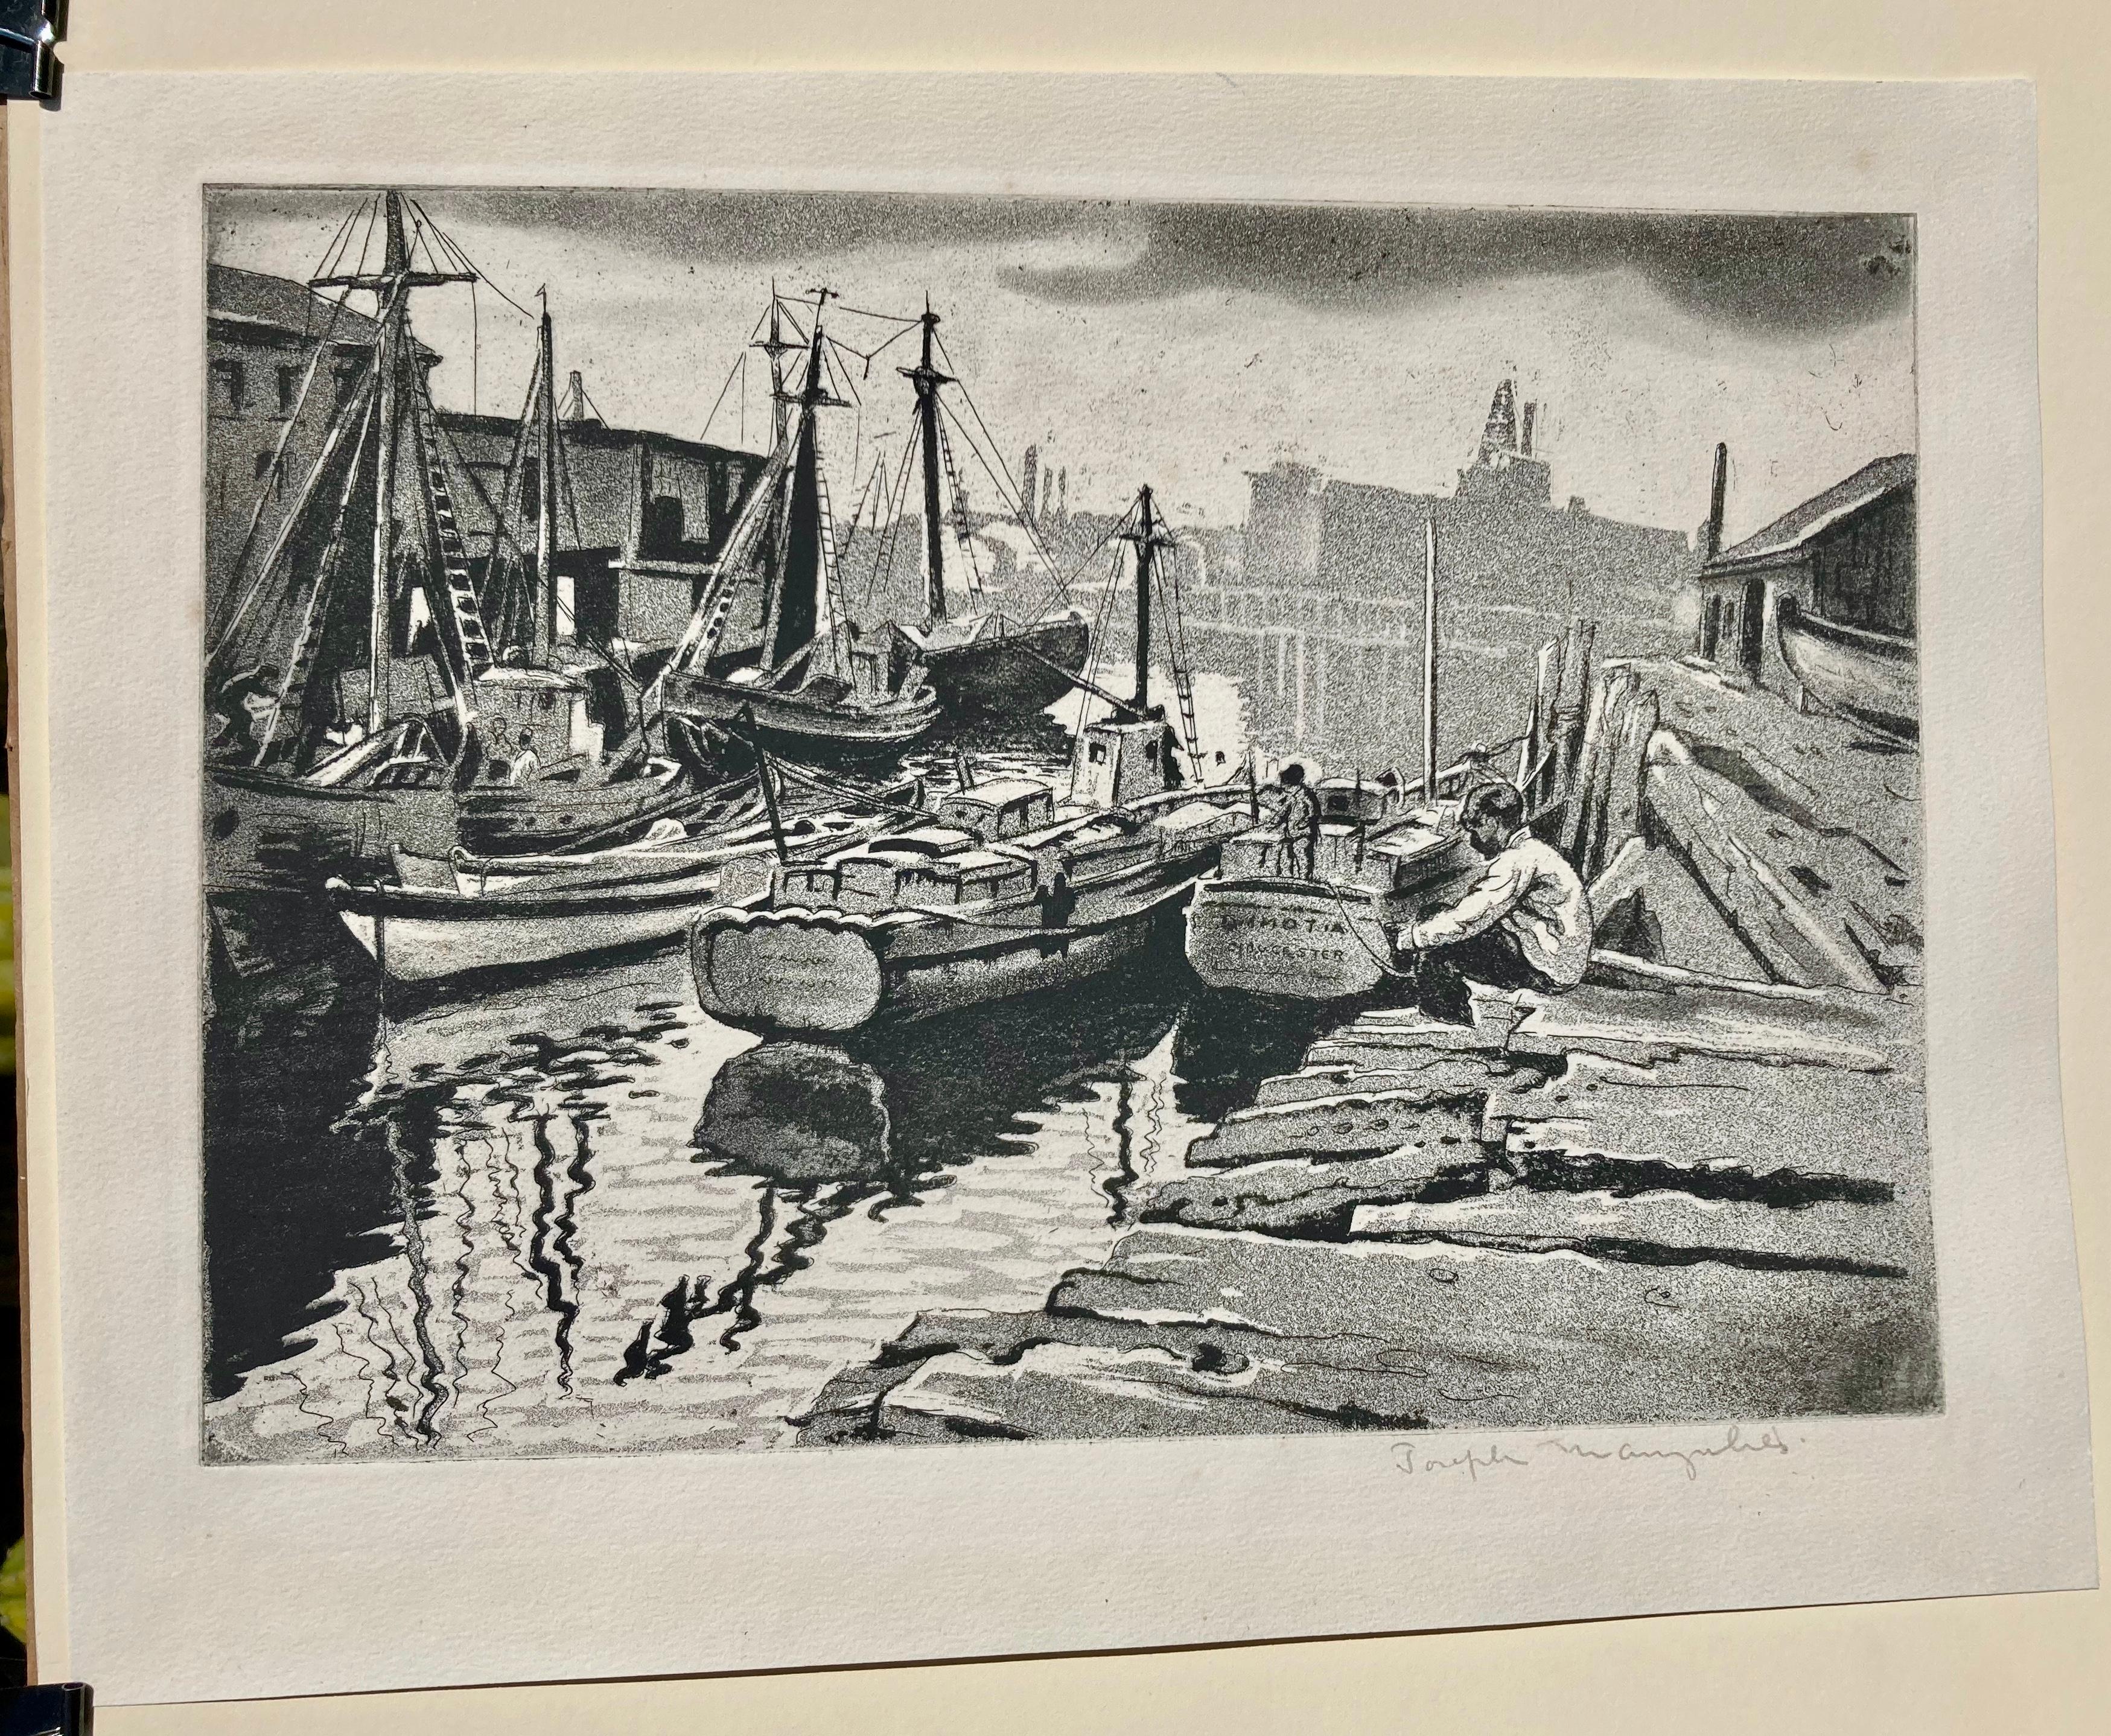 REFLECTIONS OF GLOUCESTER - Print by Joseph Margulies